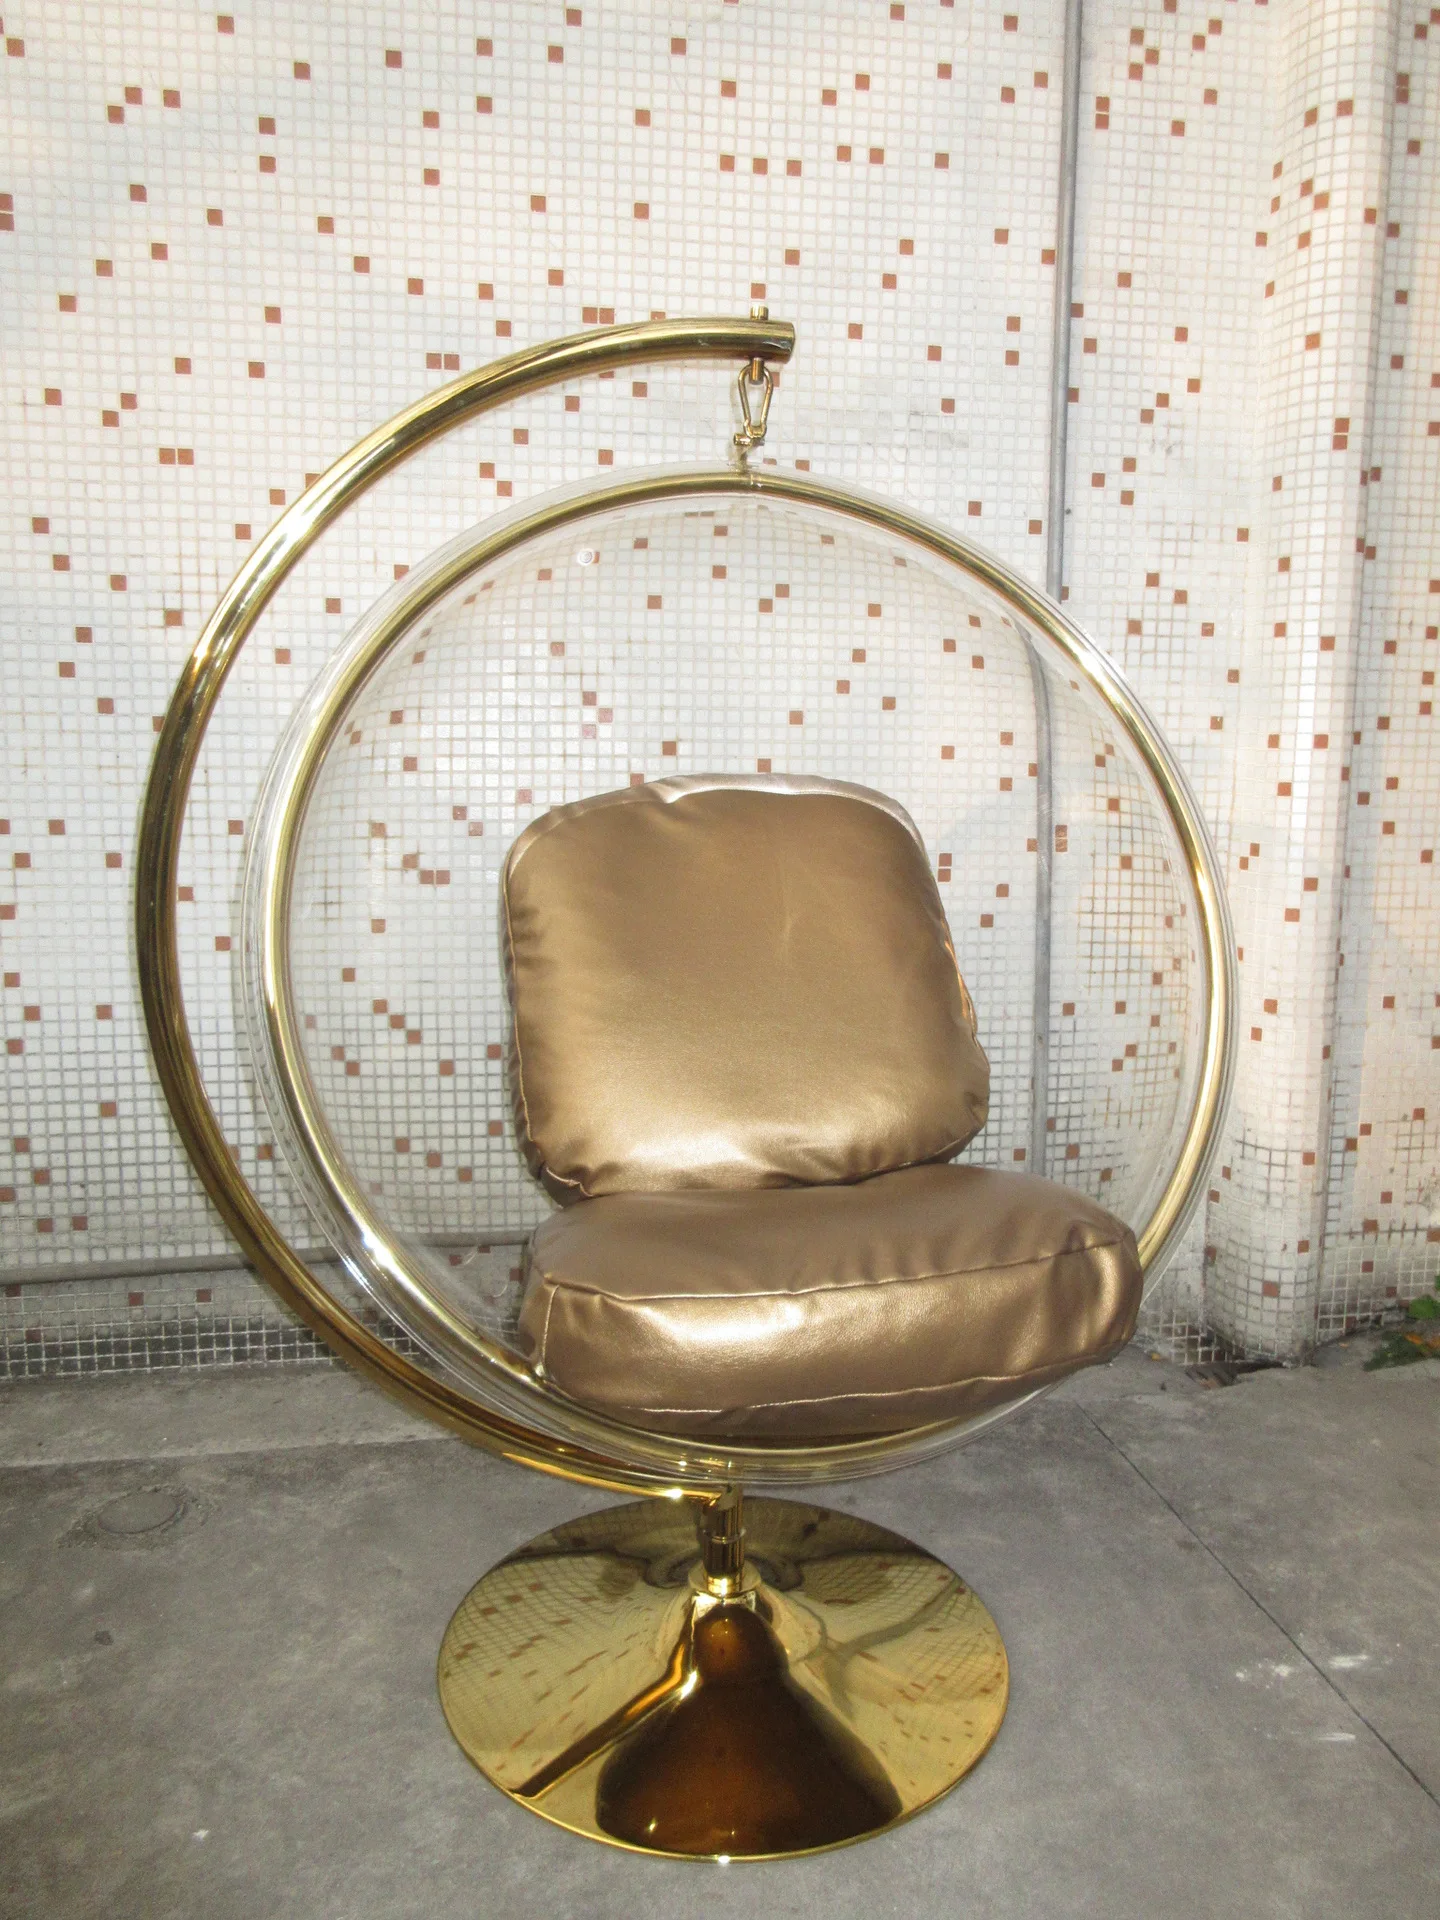 Modern Living Room Furniture Acrylic Bubble Chair Egg Chair In Brass Gold Chrome Steel Buy Bubble Chair